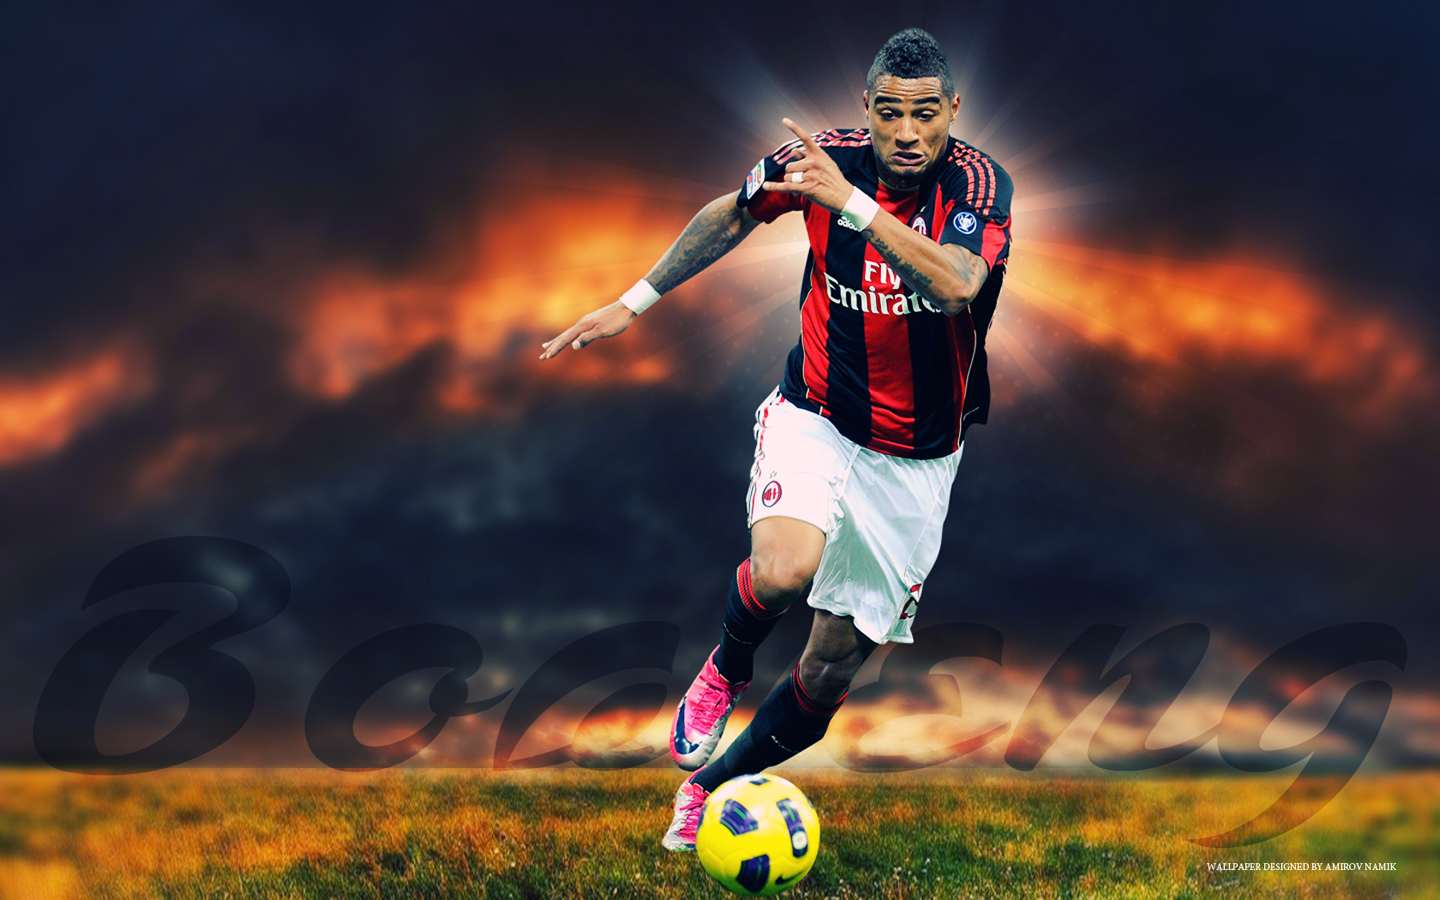 Kevin-Prince Boateng Picture by Namik Amirov